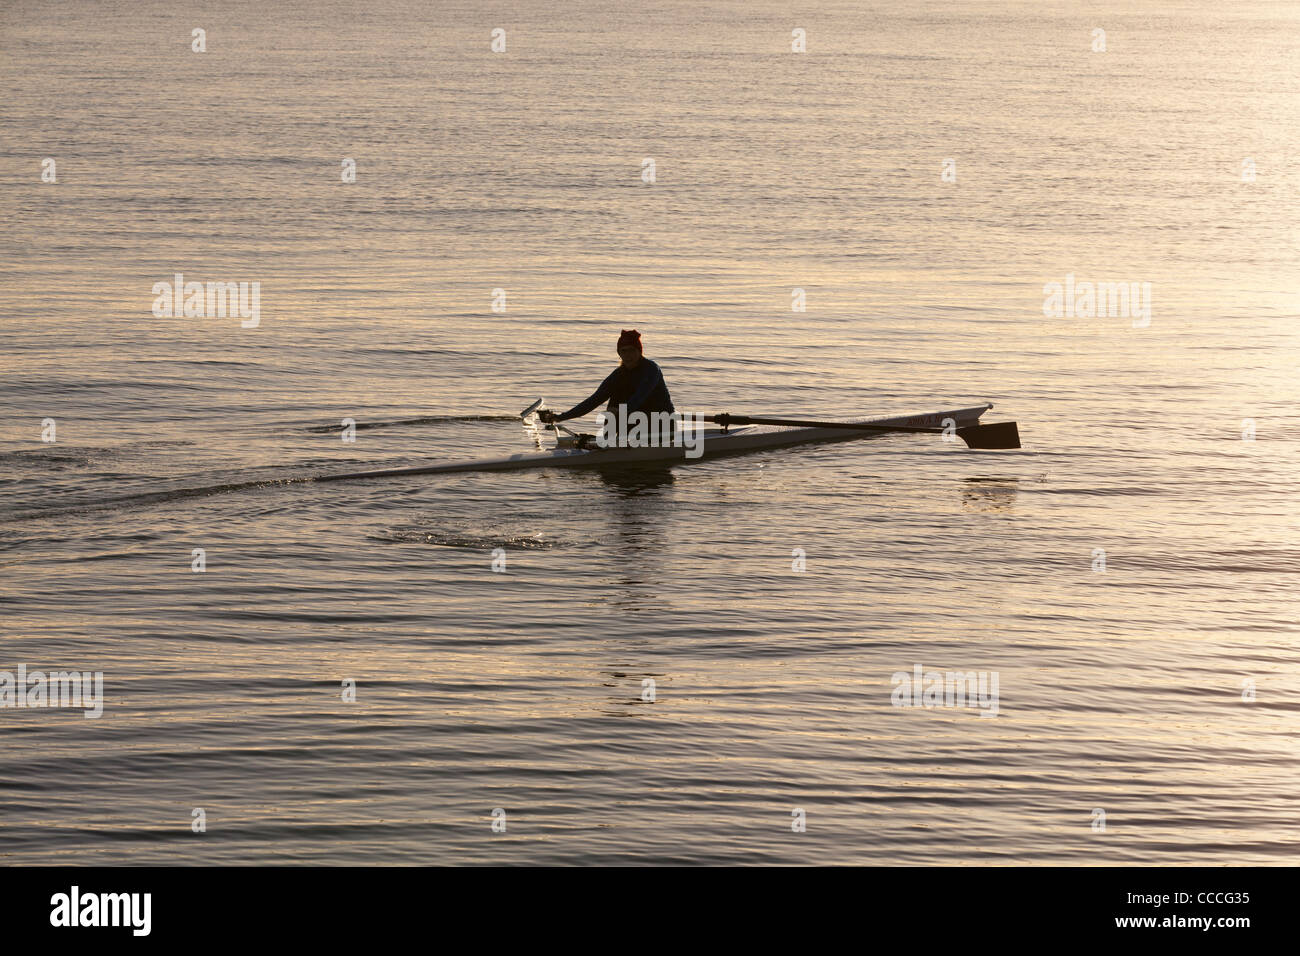 A rower in a single scull boat Stock Photo